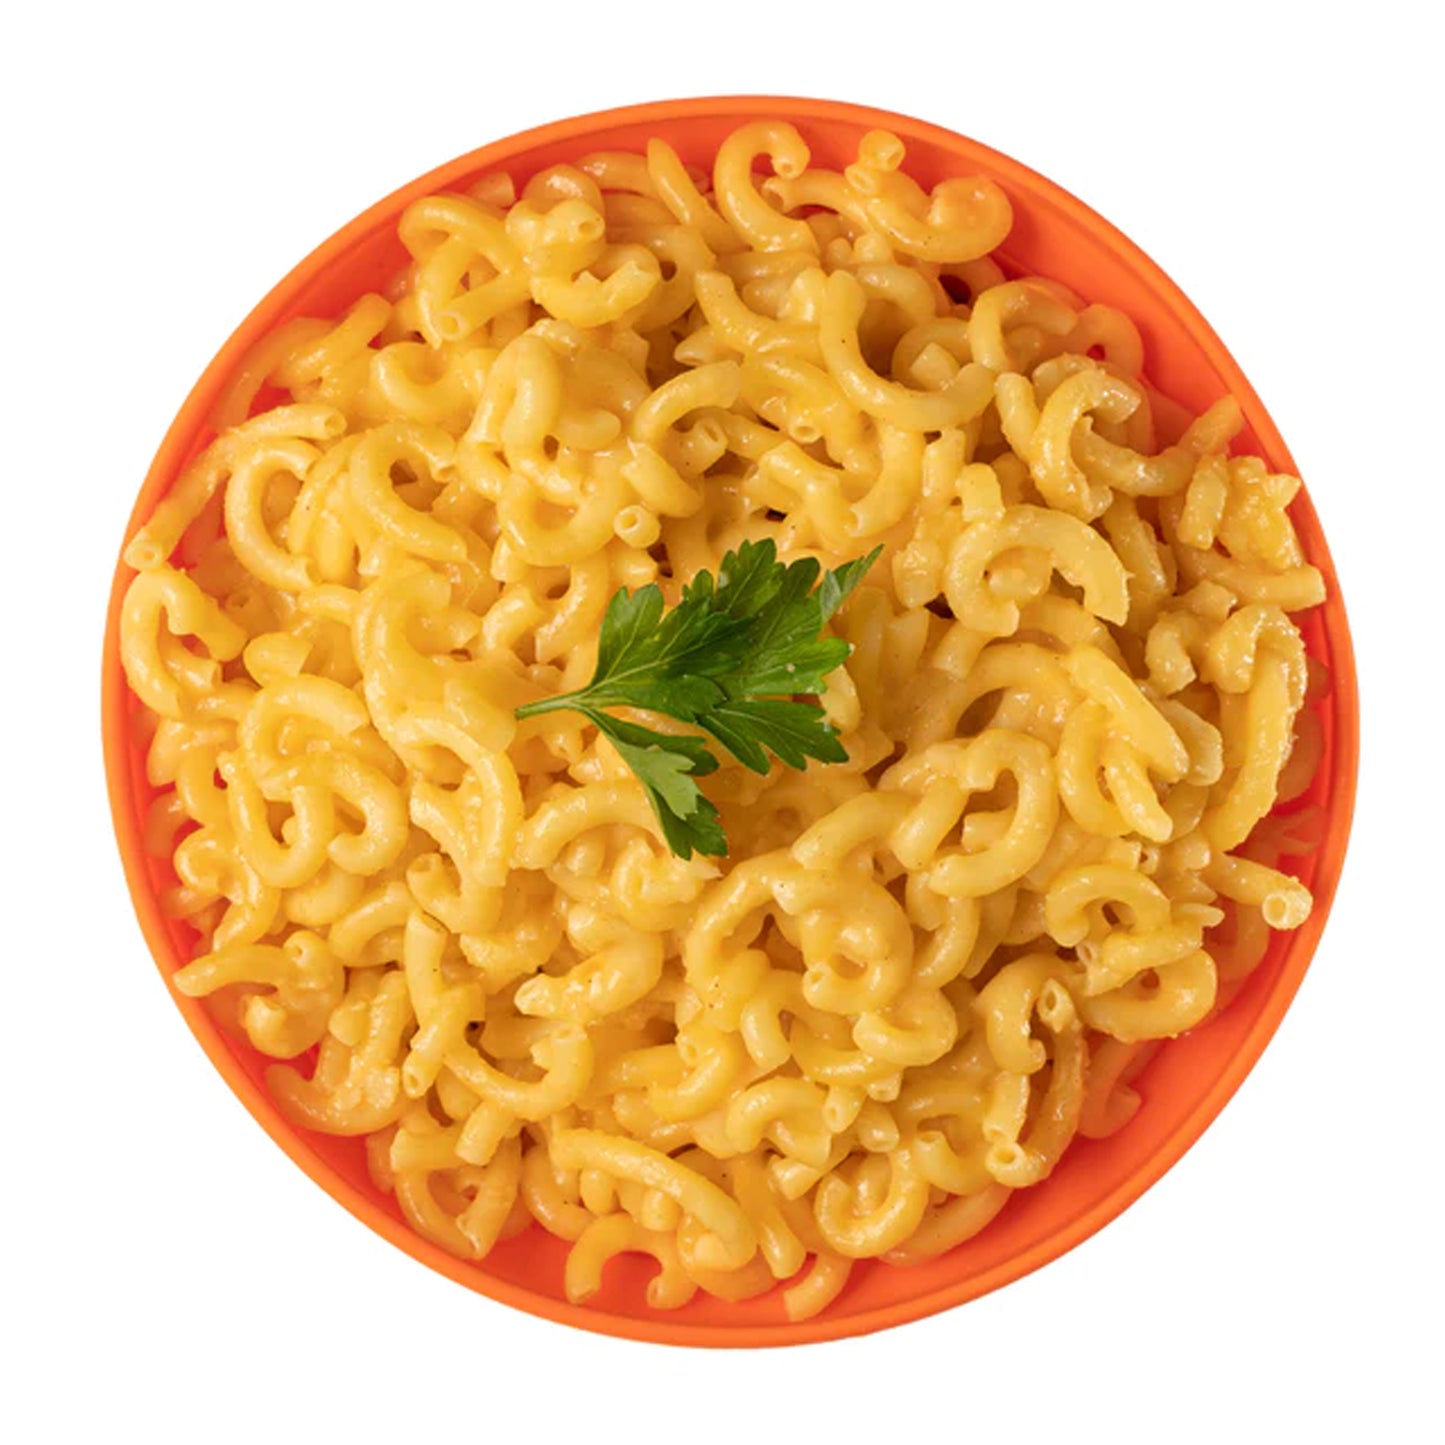 Expedition Foods Macaroni And Cheese Meal